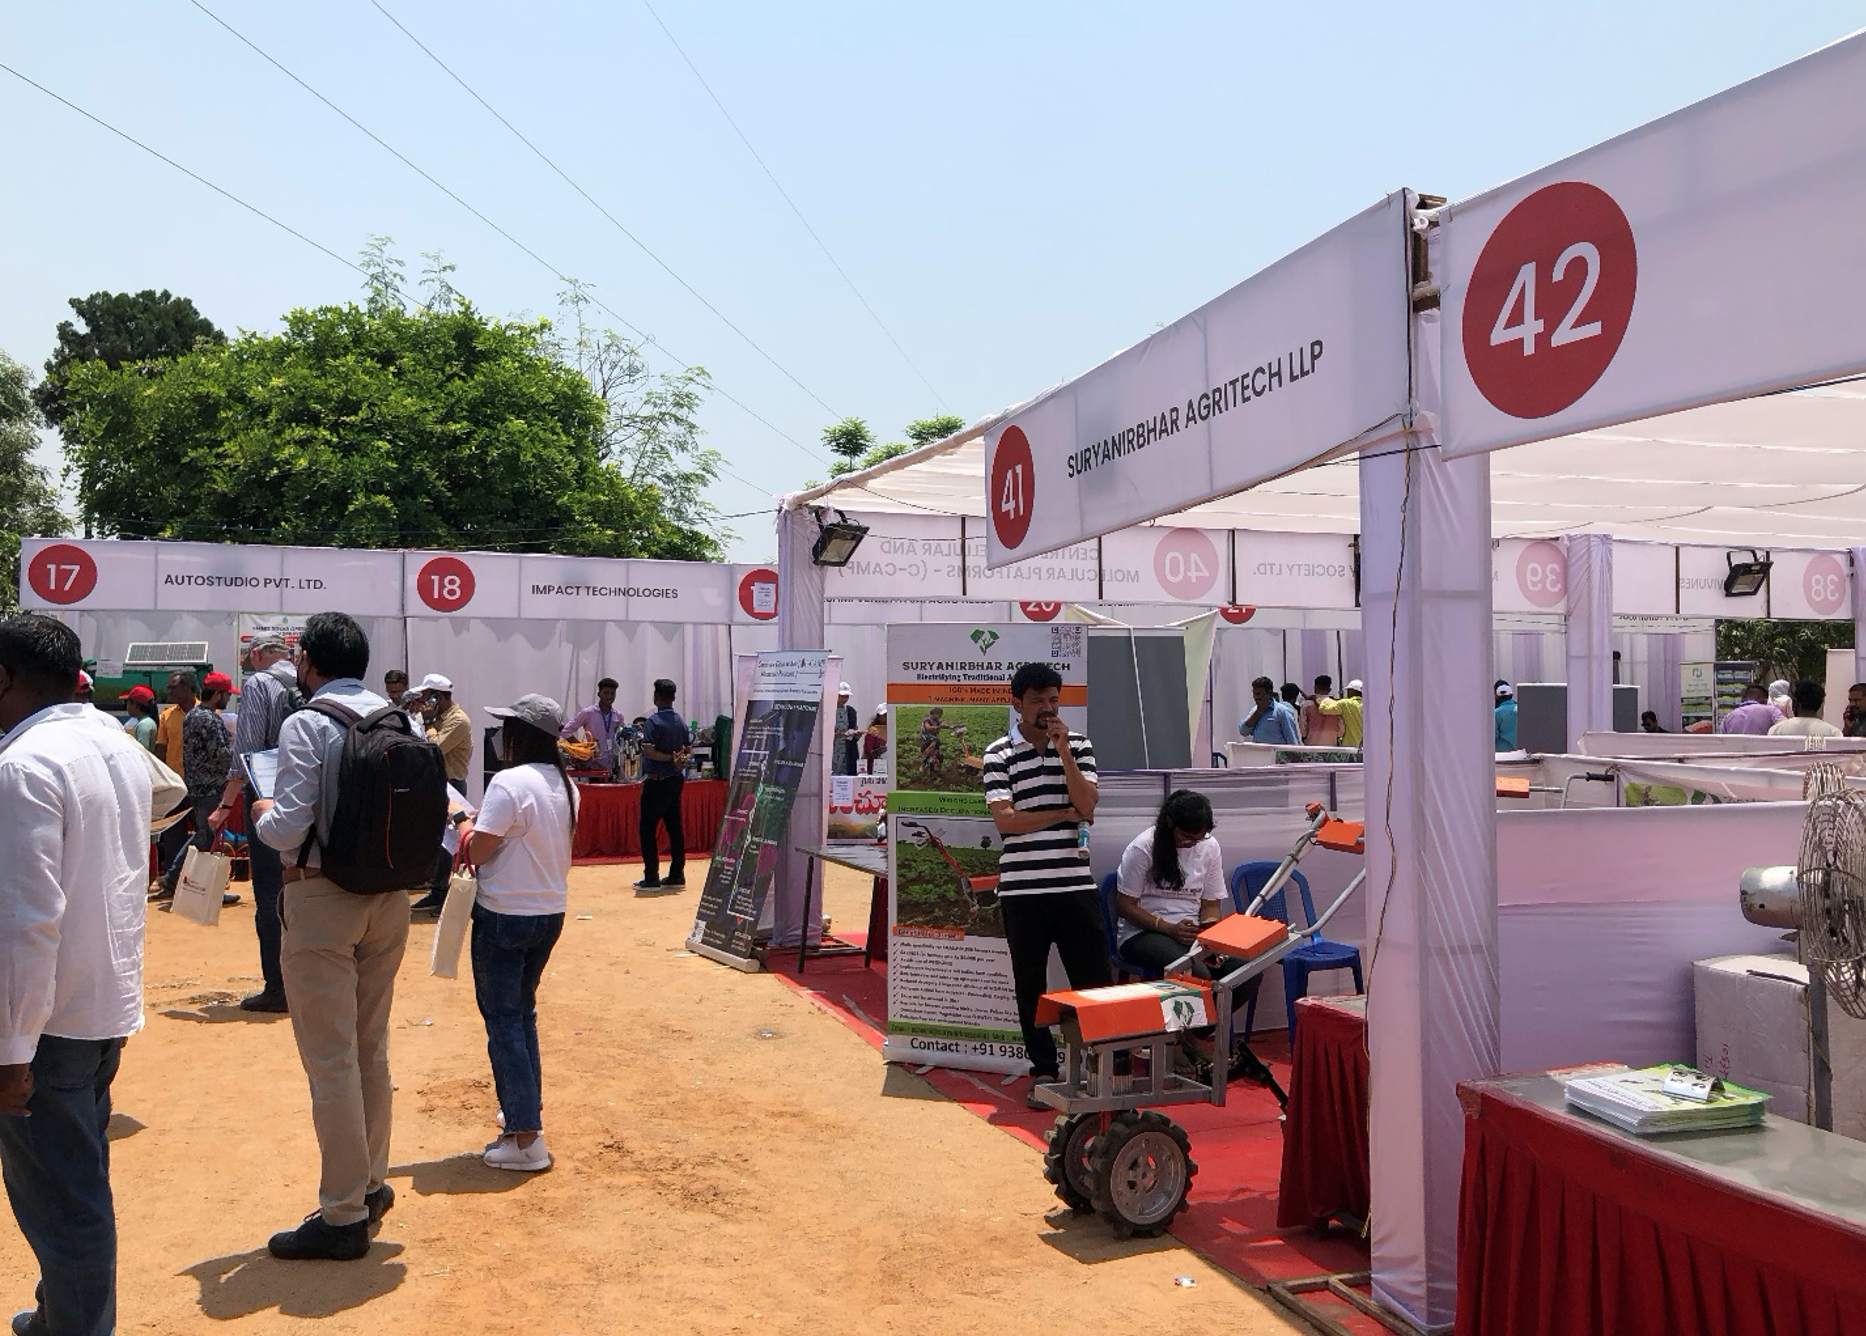 Agricultural exhibition on Solar technologies